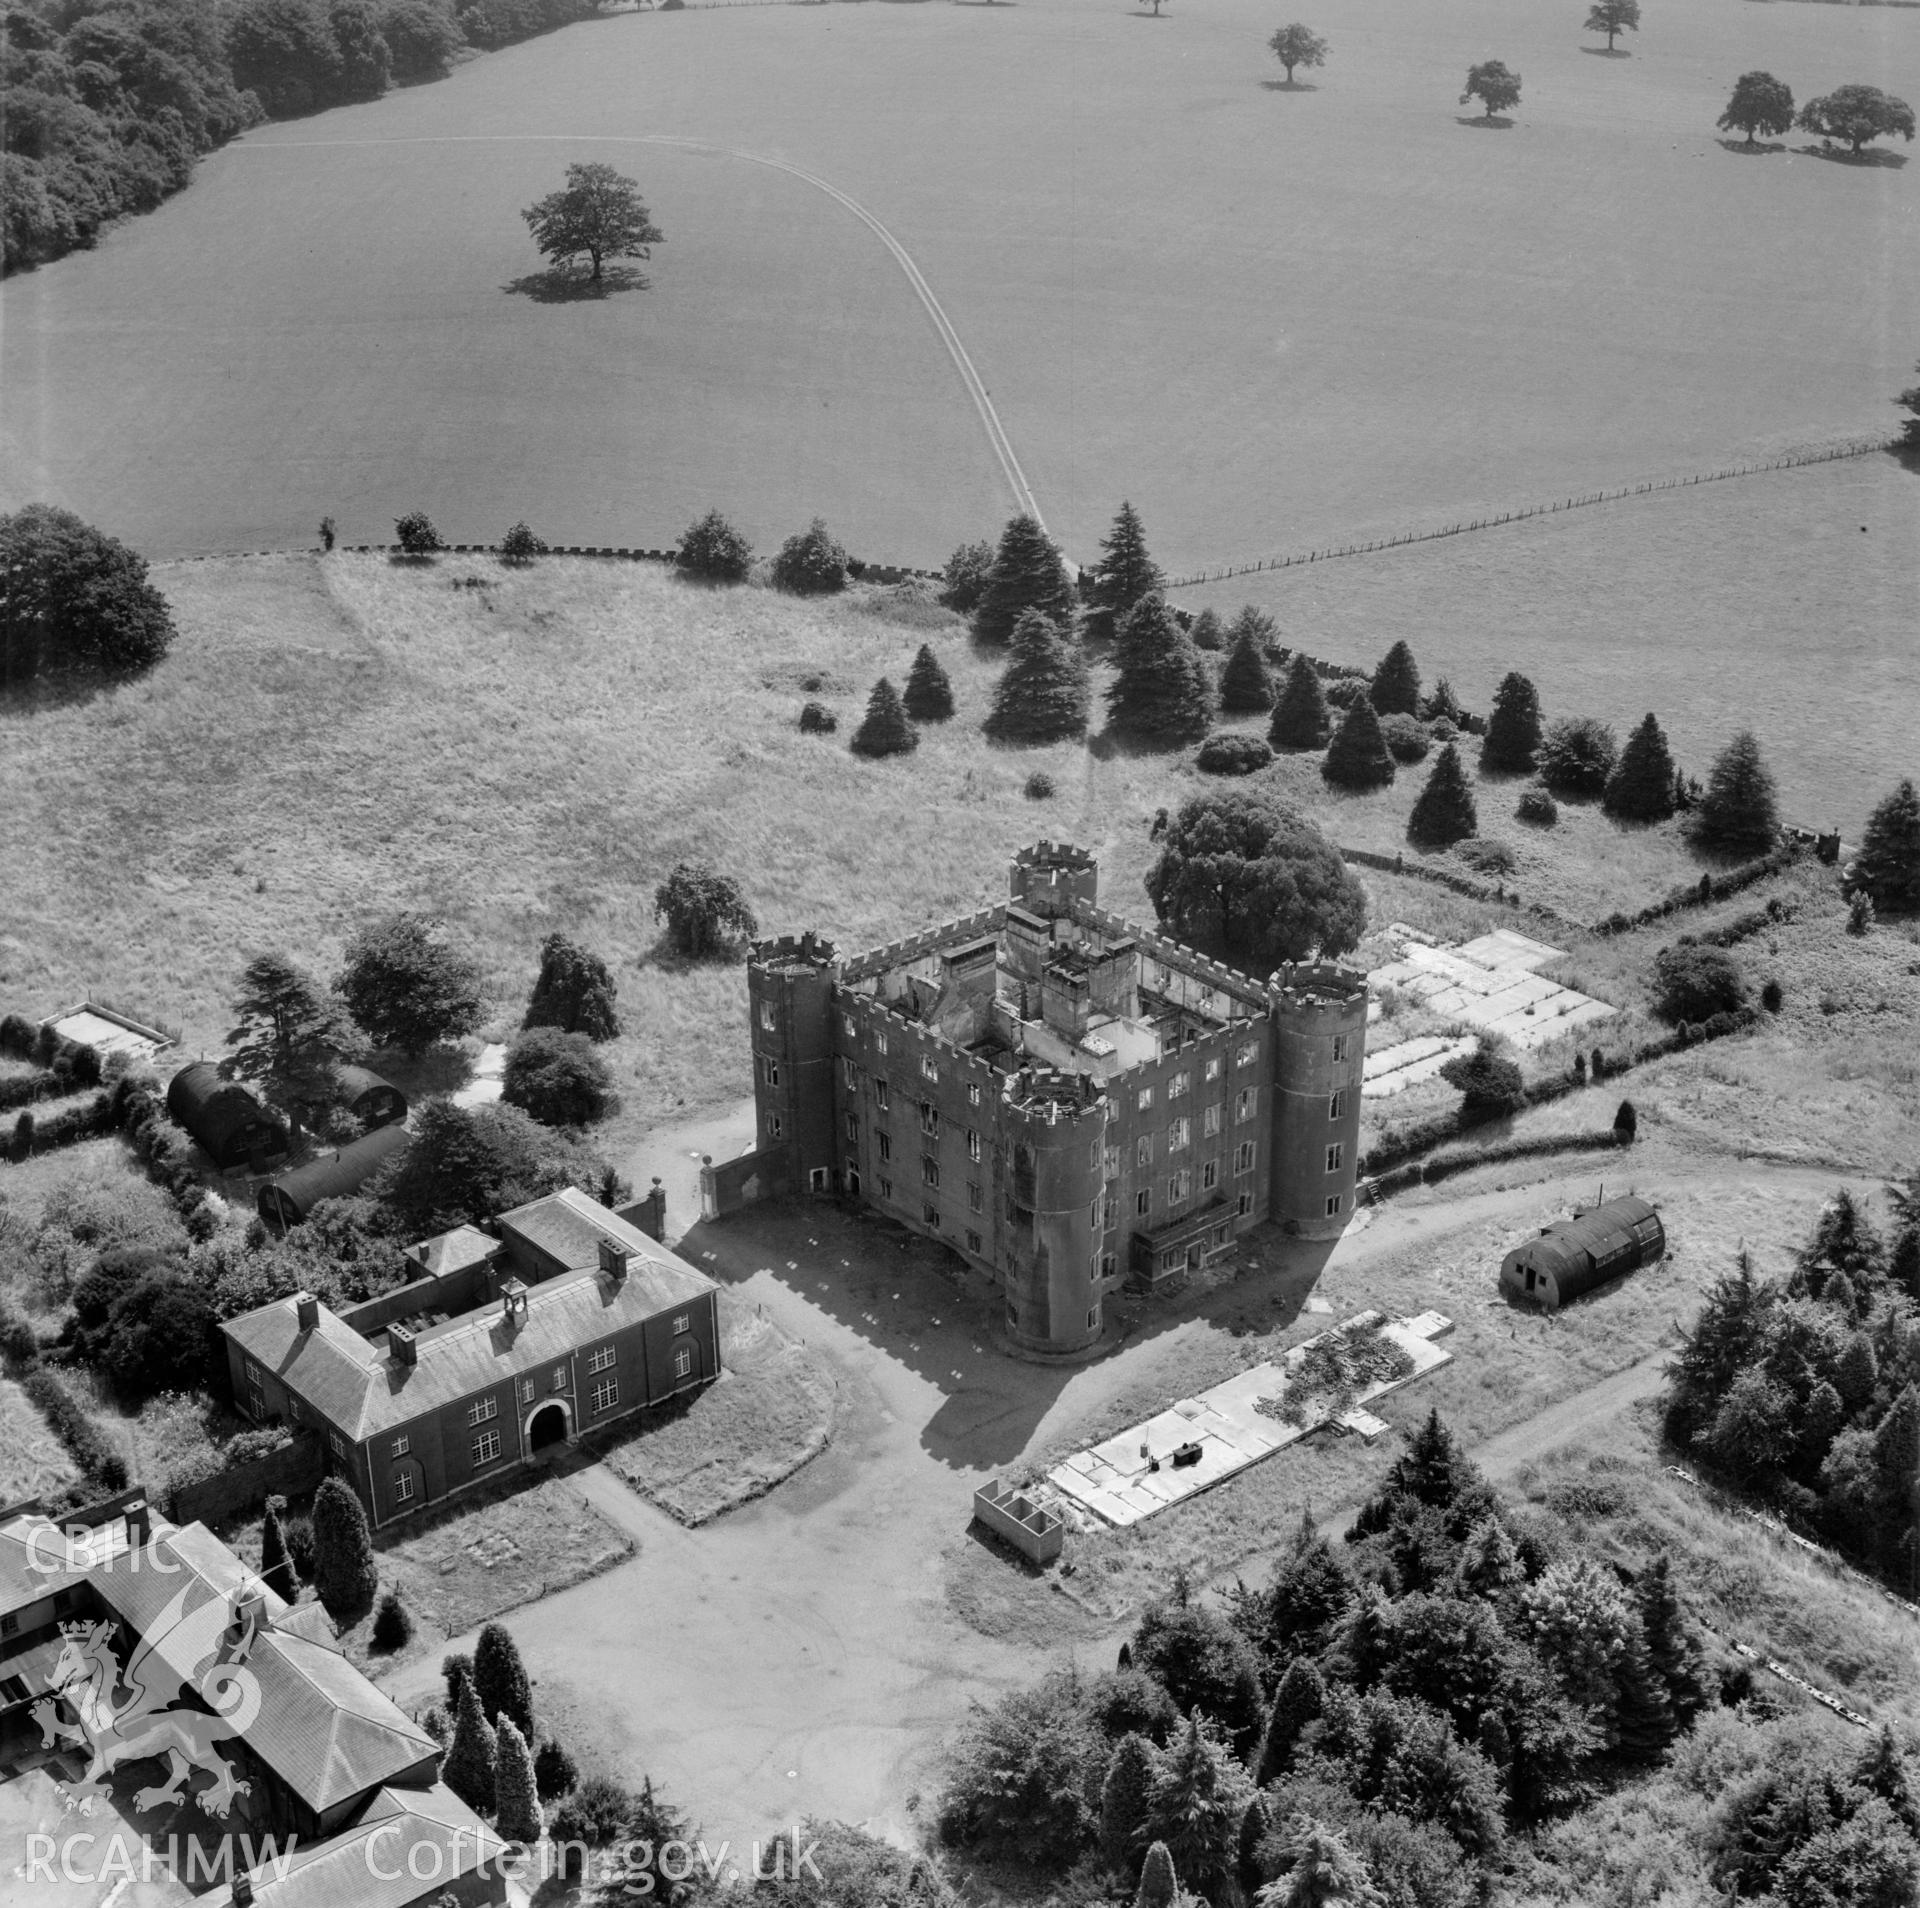 View of Ruperra castle showing damage caused by the fire in 1942 and wartime structures